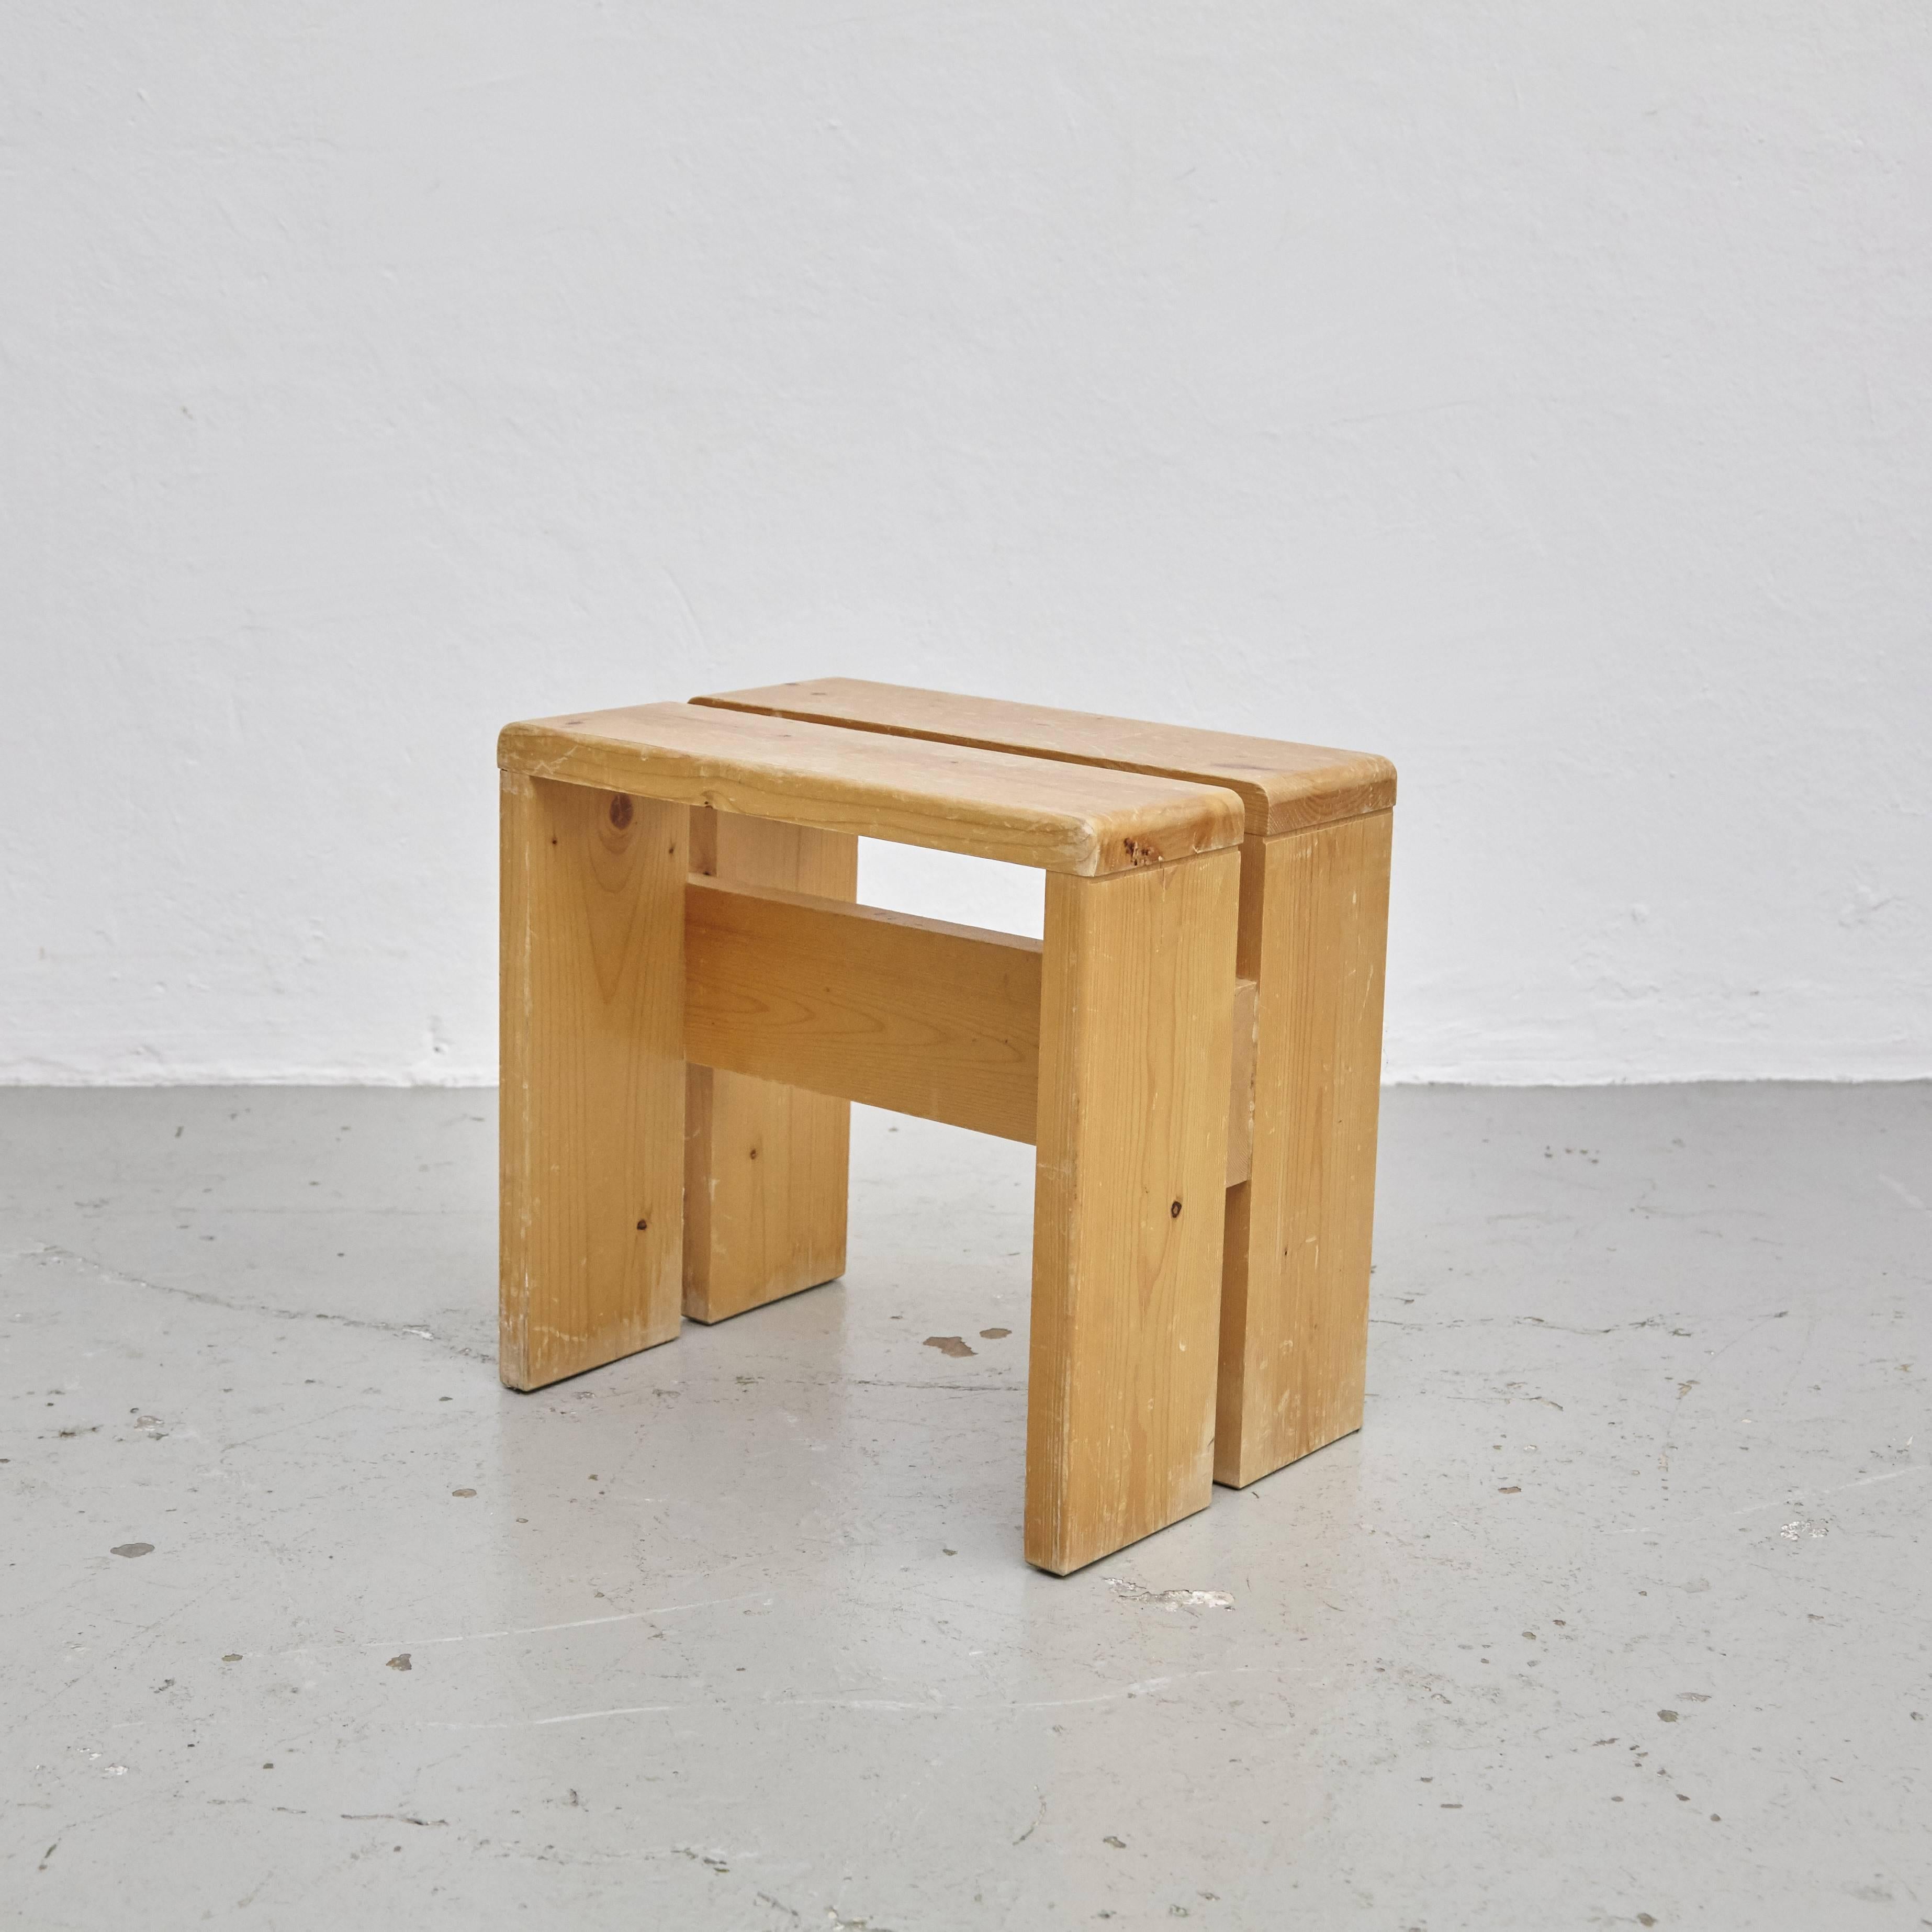 Stool designed by Charlotte Perriand for Les Arcs ski resort, circa 1960.
Manufactured in France.

Pine wood.

In original condition, with minor wear consistent with age and use, preserving a beautiful patina.

Charlotte Perriand (1903 -